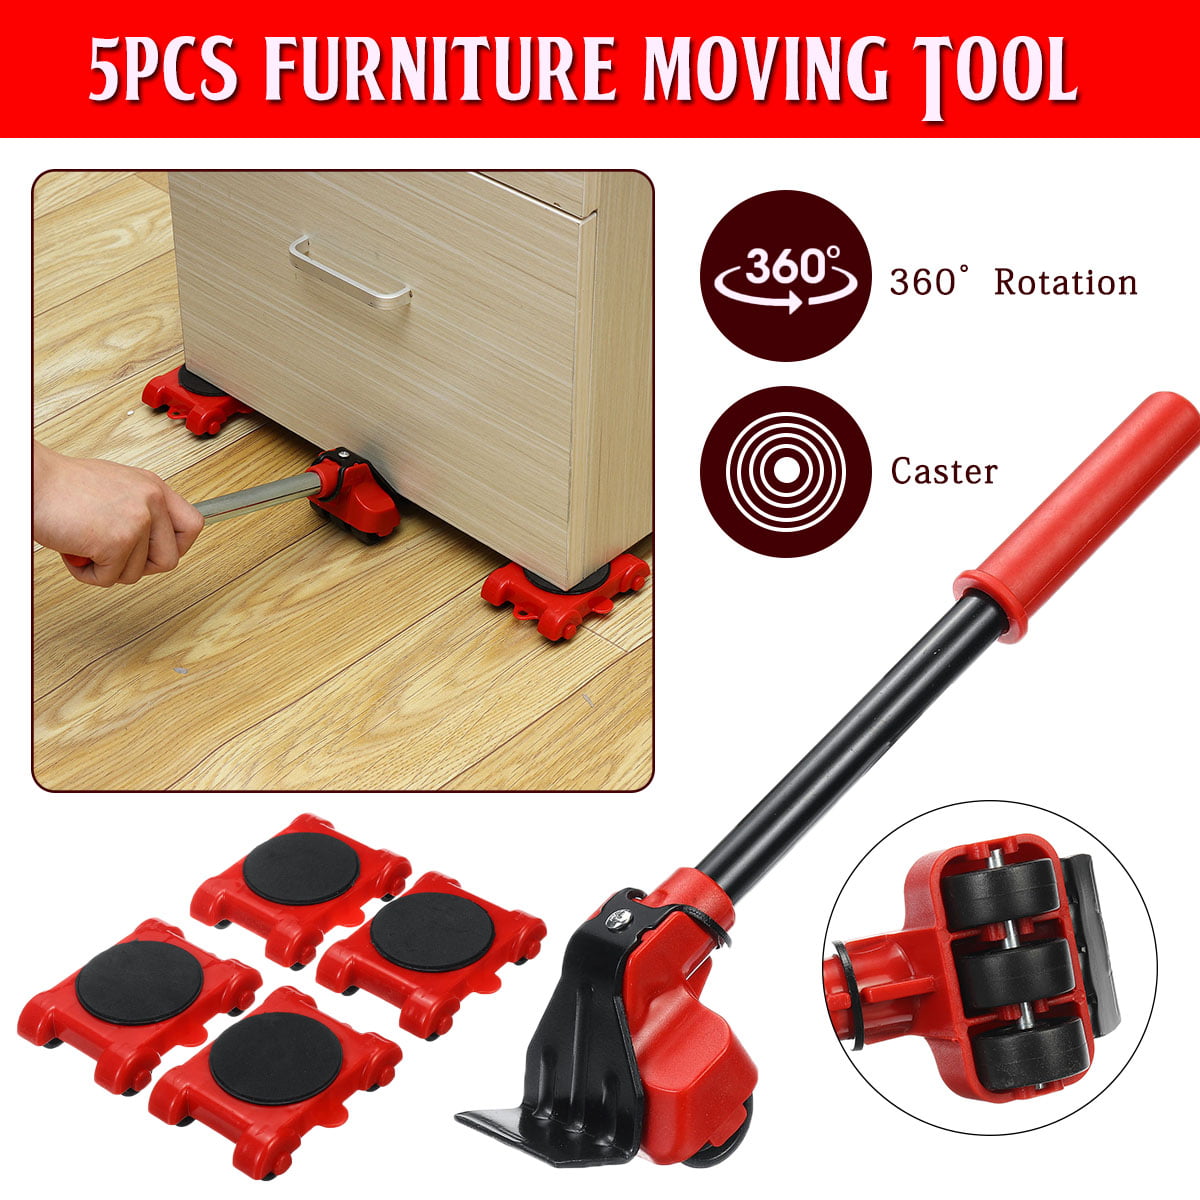 Heavey Duty Furniture Moving Roller Wheel Sets for Fridge/Sofa by Poweka Furniture Lifter Mover Tools with 4 Pcs 360 Degree Rotatable Moving Sliders